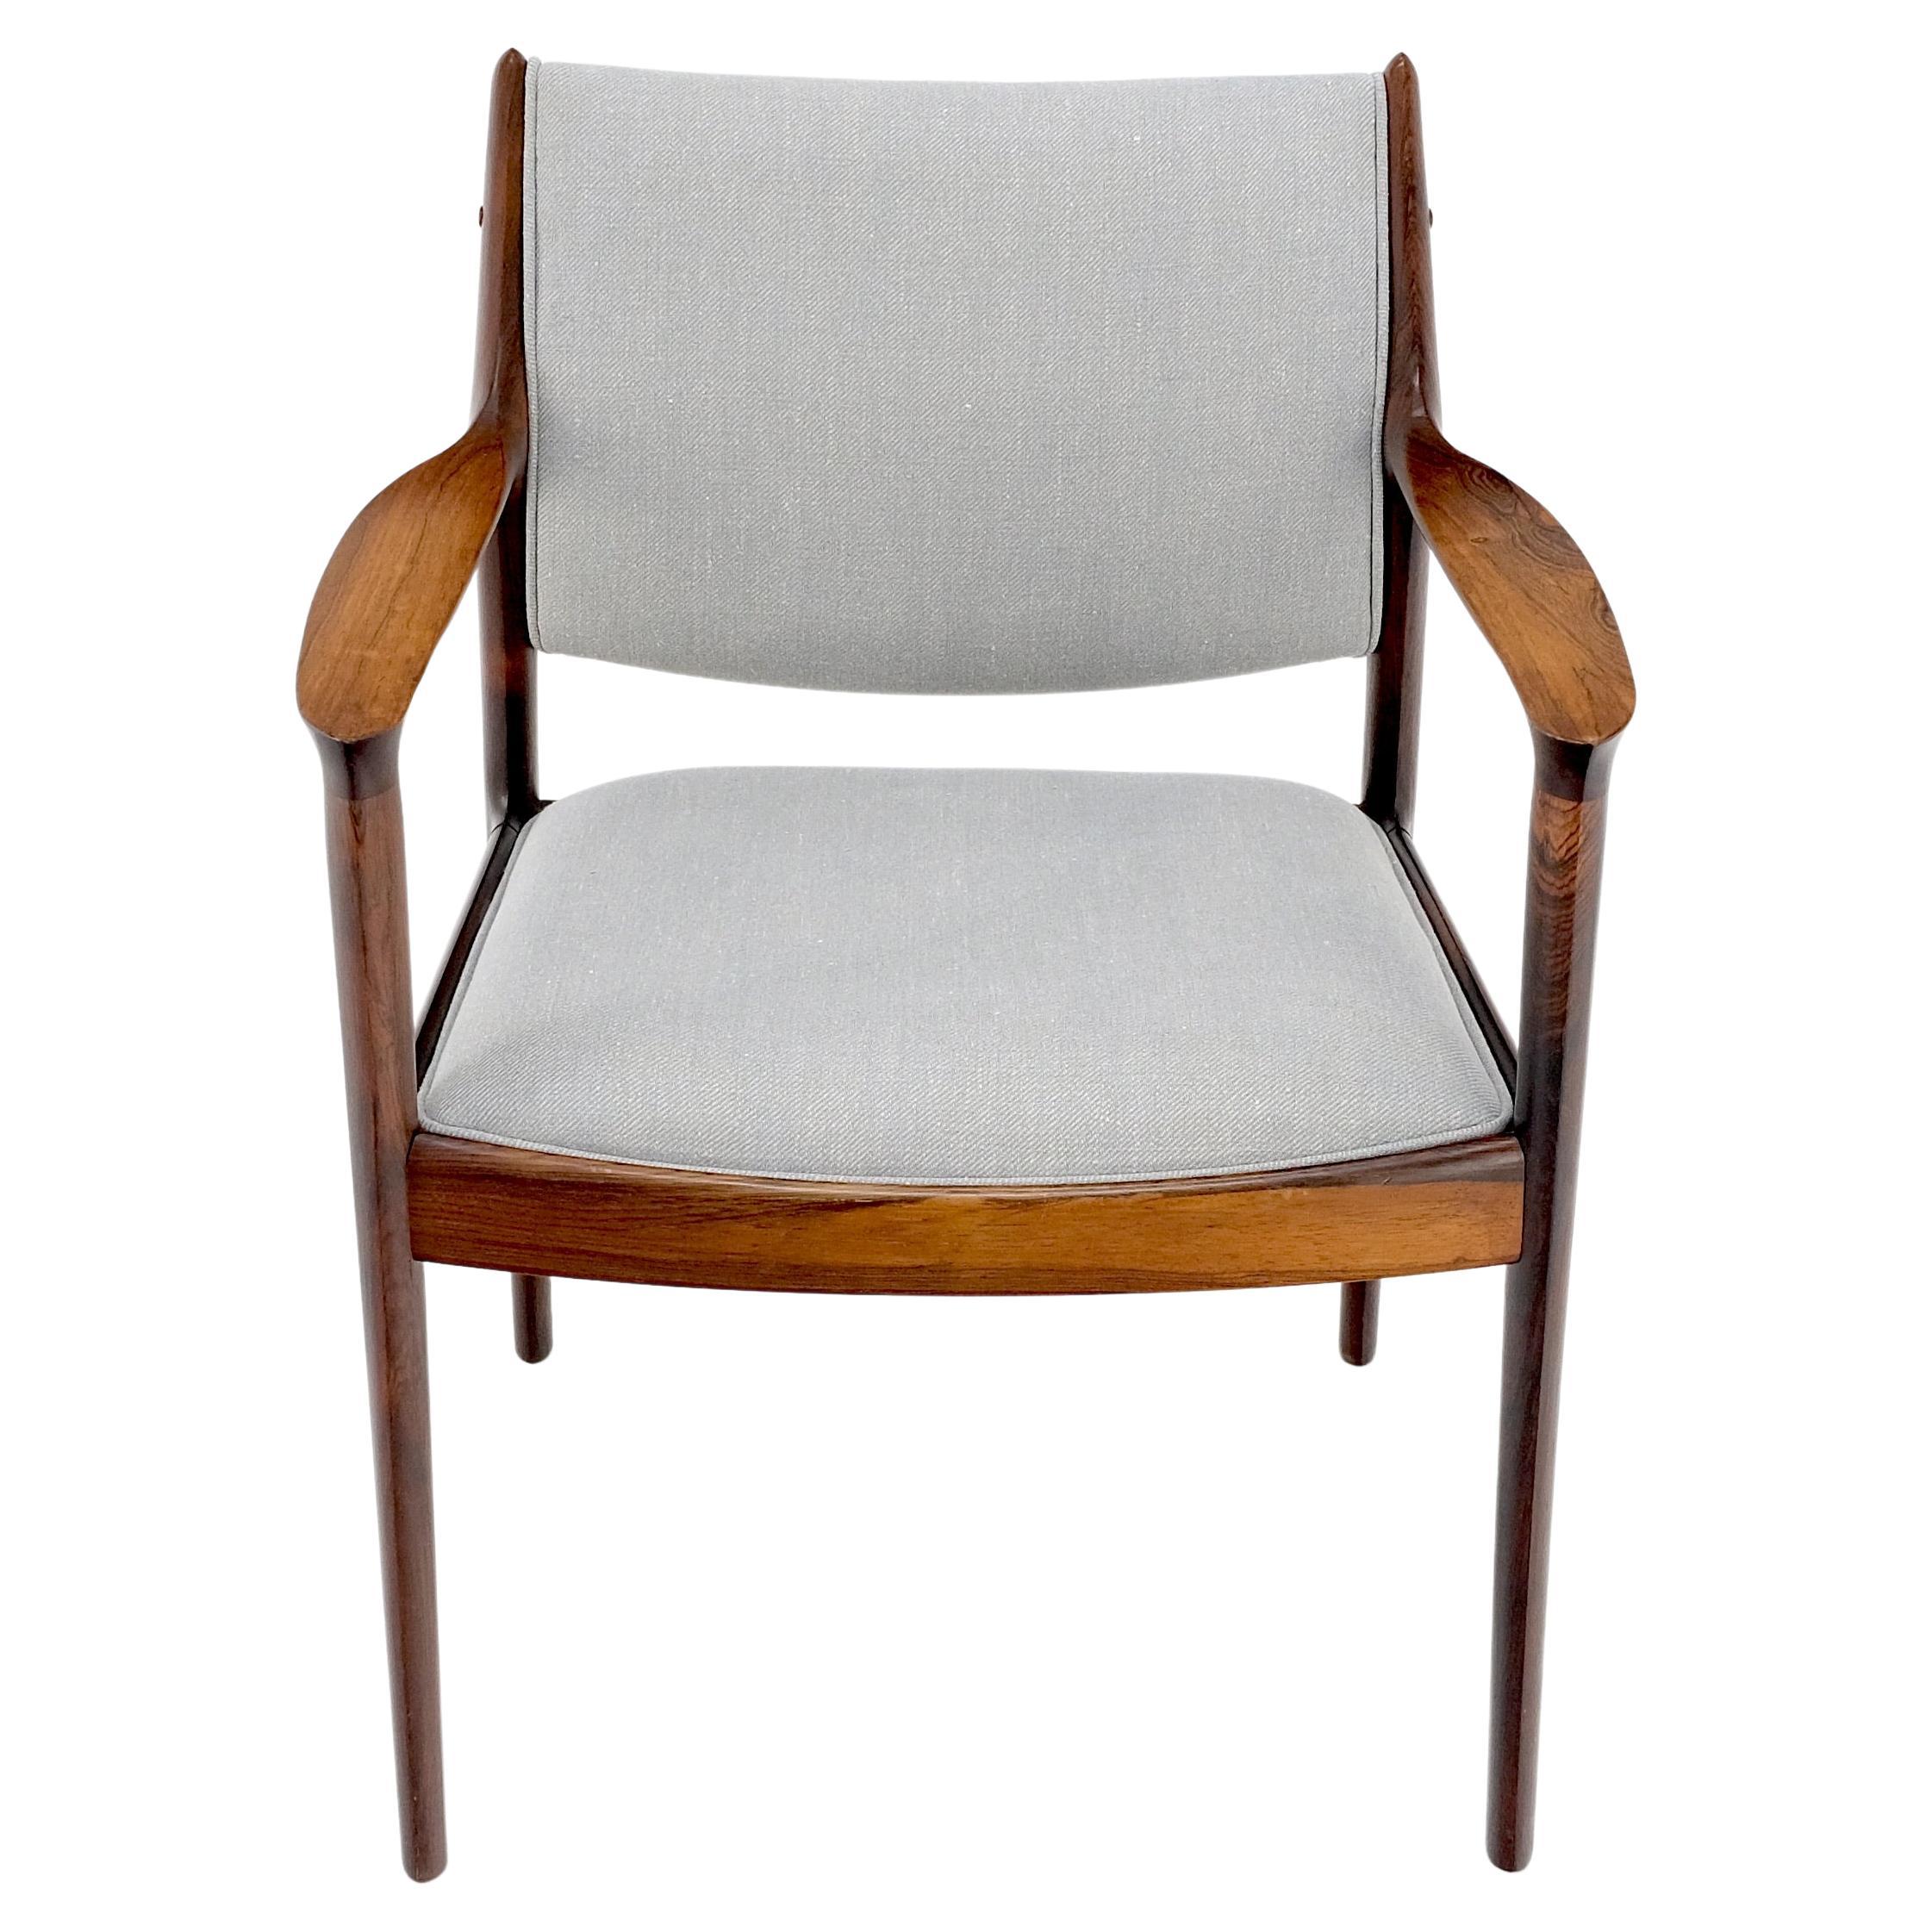 Danish Finn Juhl Attributed Heavy Solid Rosewood Arm Desk Chair New Upholstery Mint! For Sale